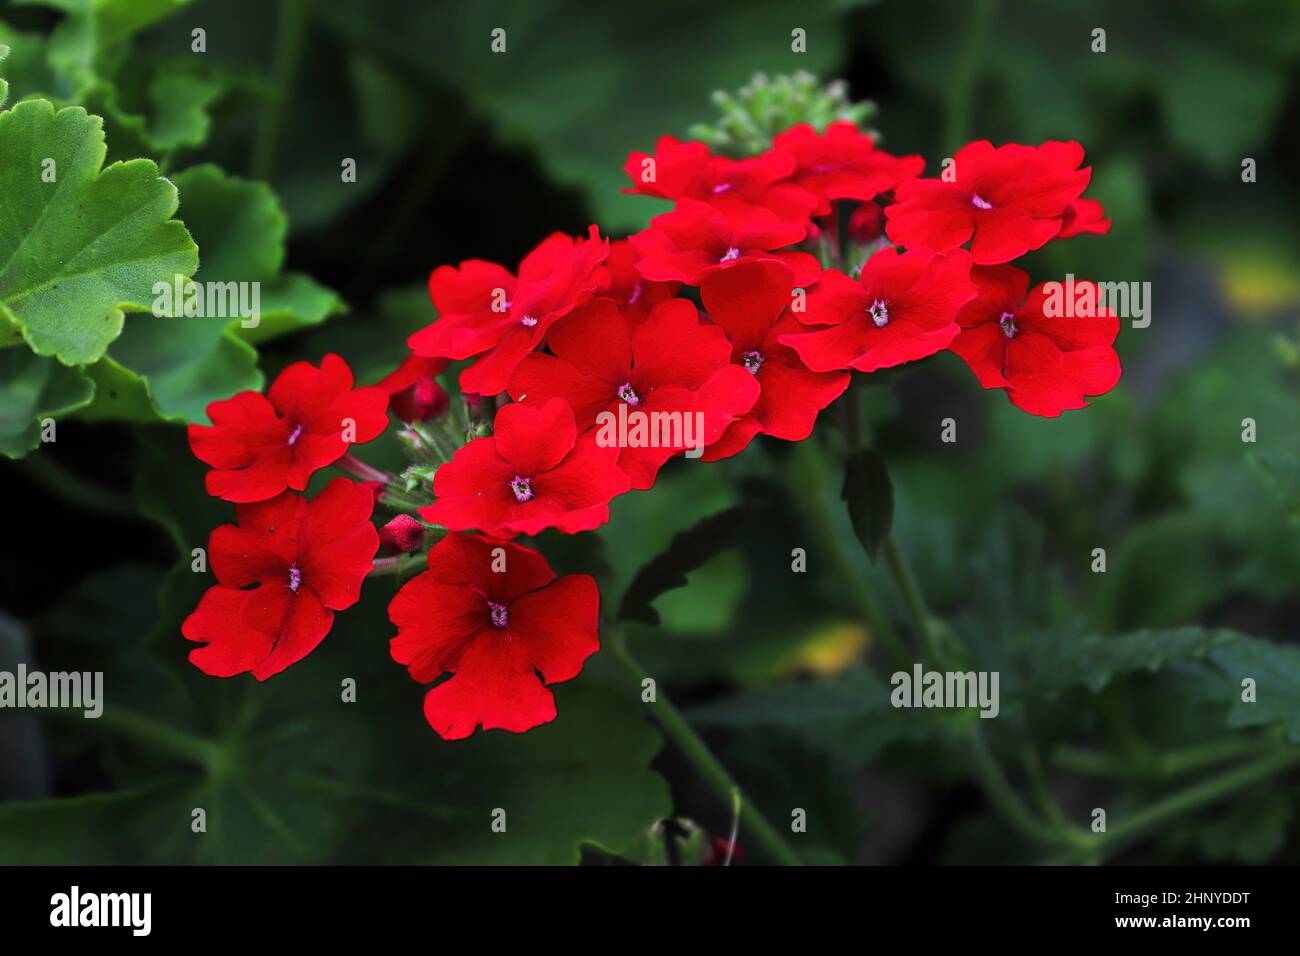 Red verbena flowers in full bloom during spring. Stock Photo